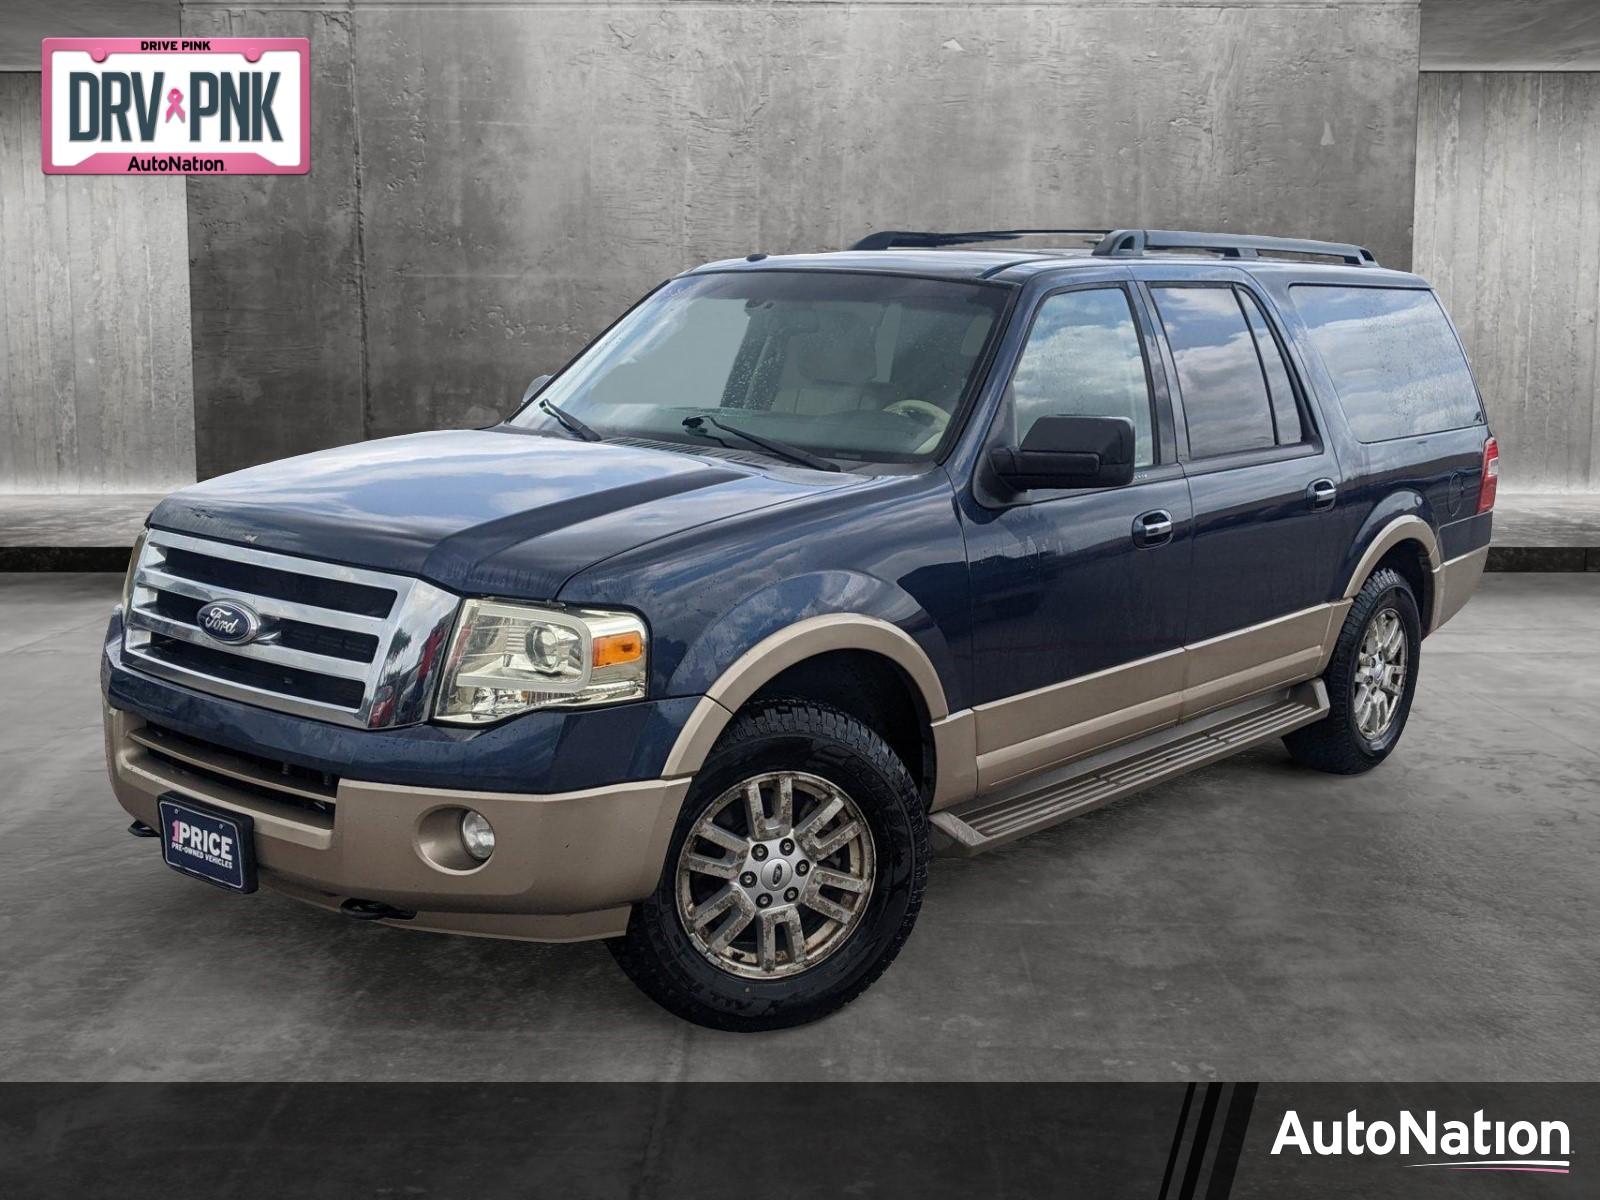 2013 Ford Expedition EL Vehicle Photo in Corpus Christi, TX 78415